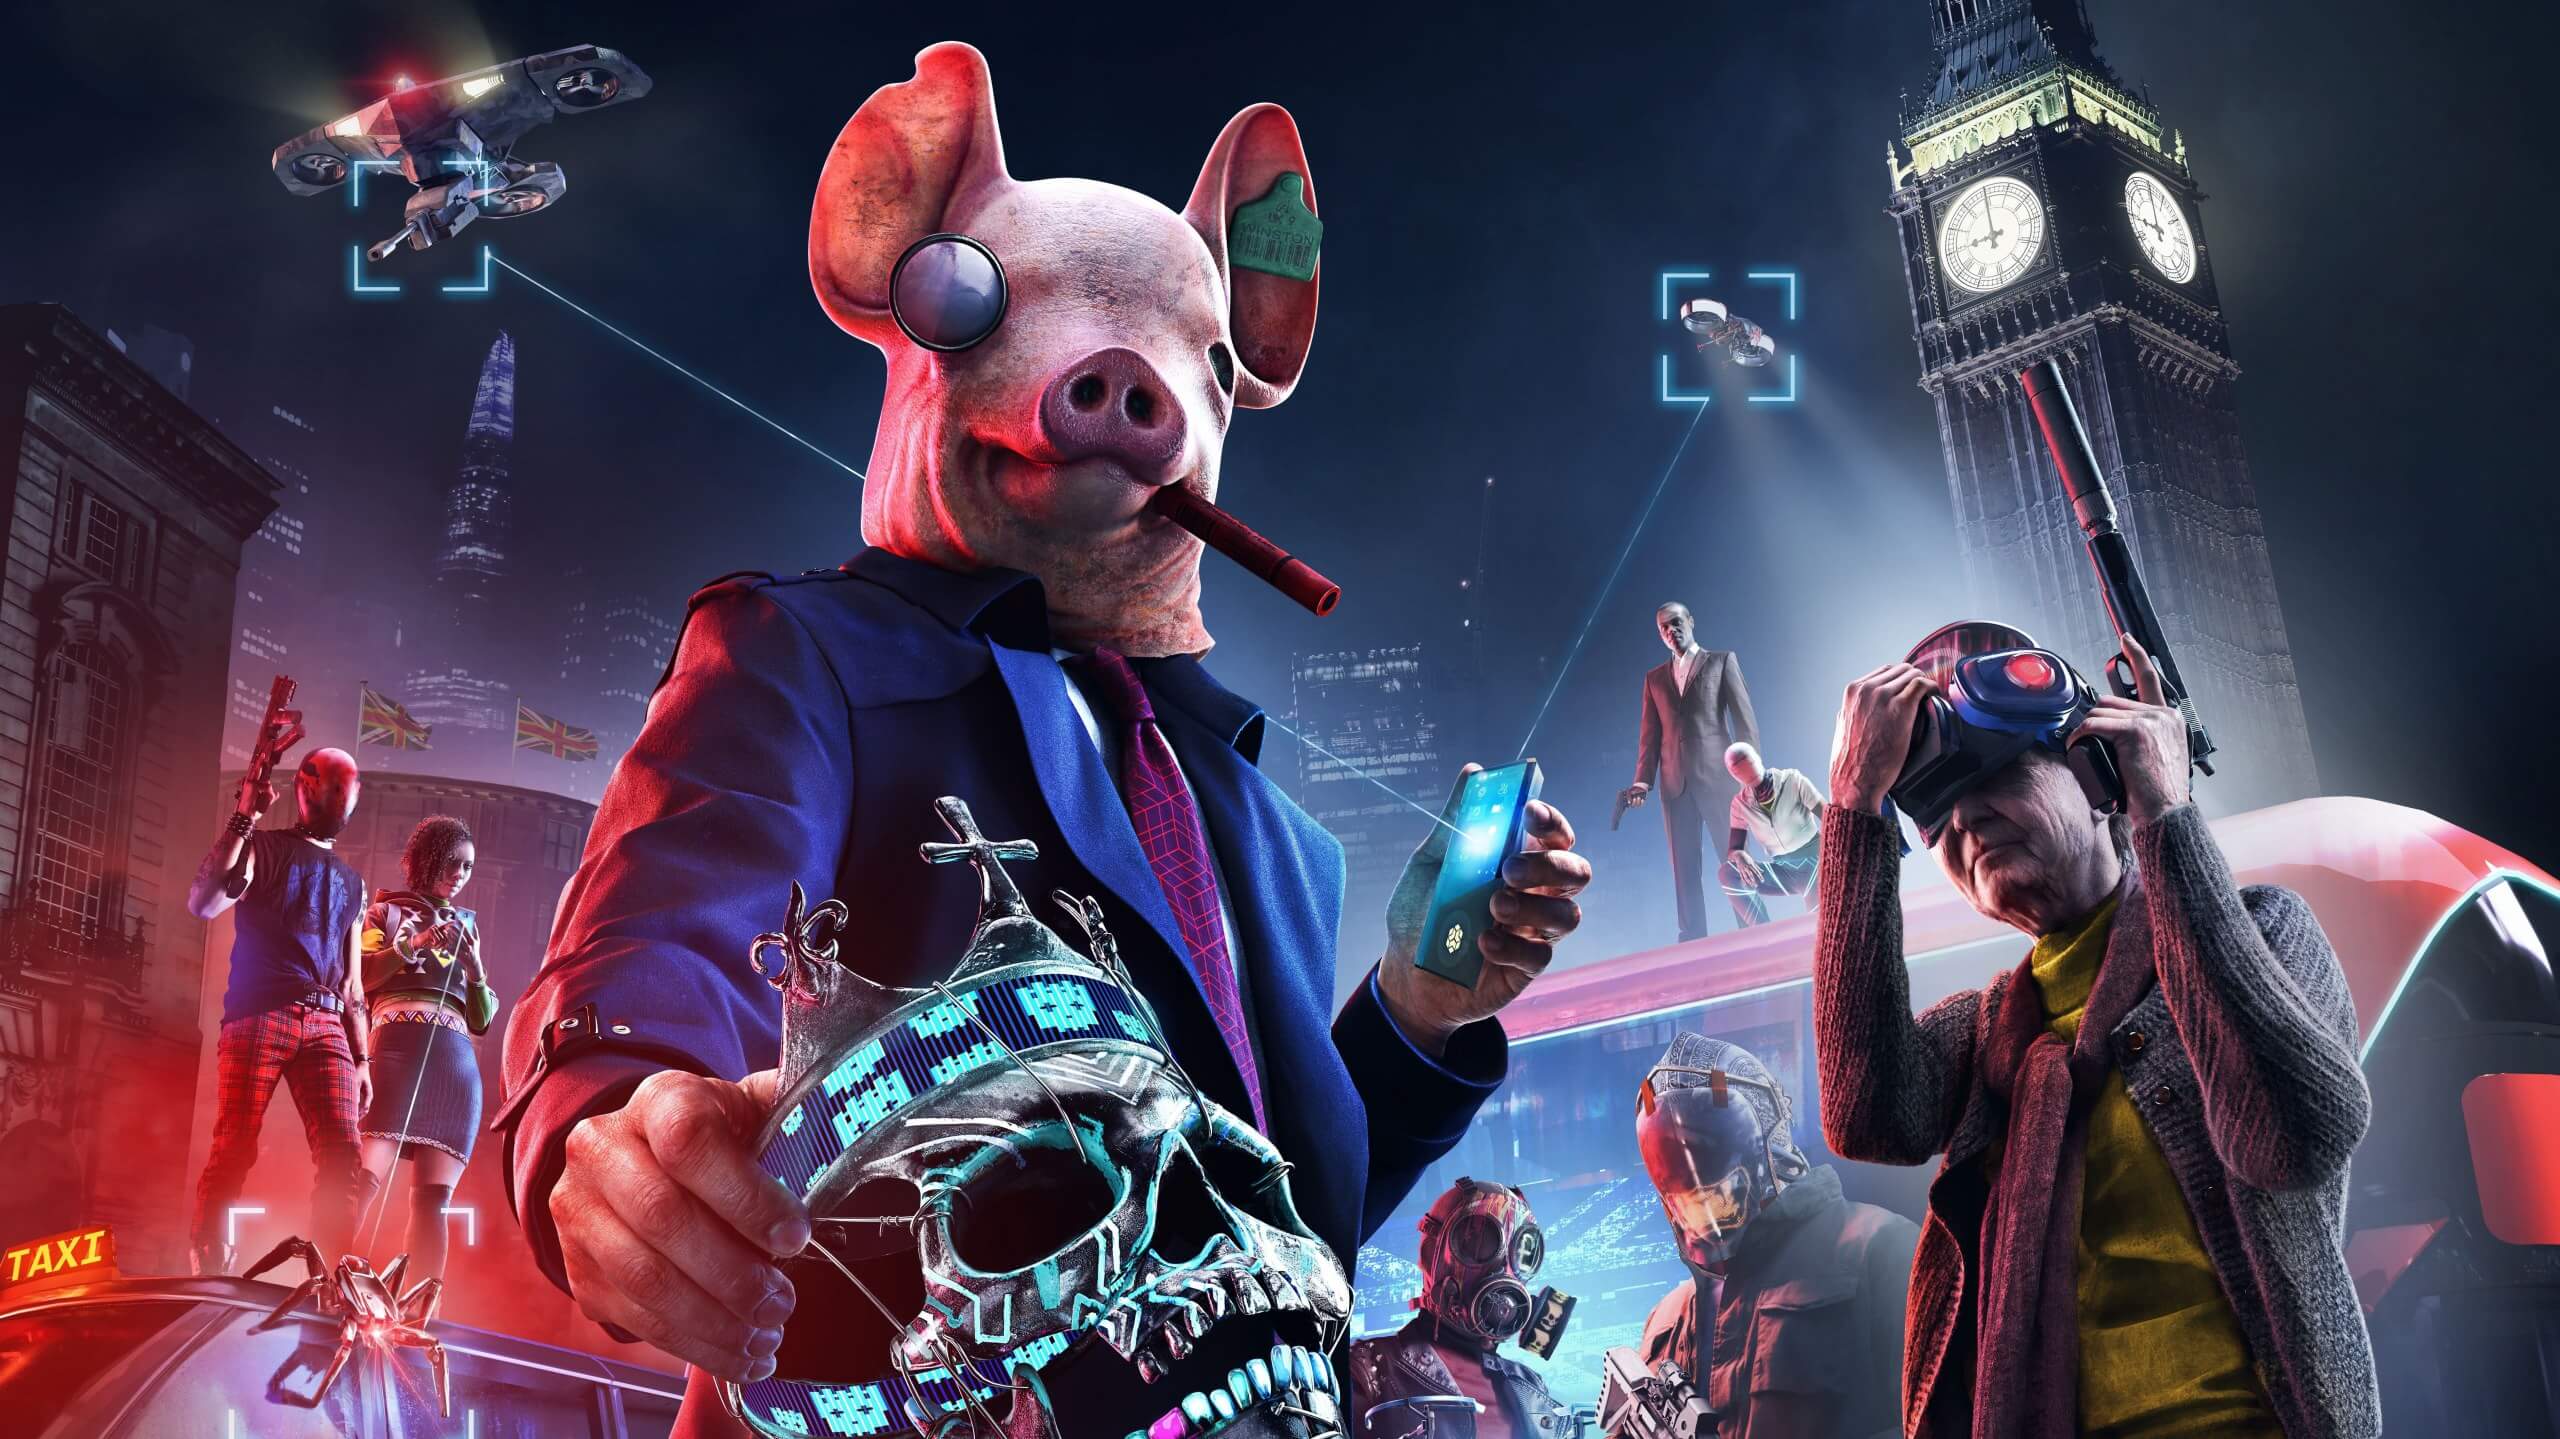 Watch Dogs: Legion has millions of procedurally-generated characters who are all playable